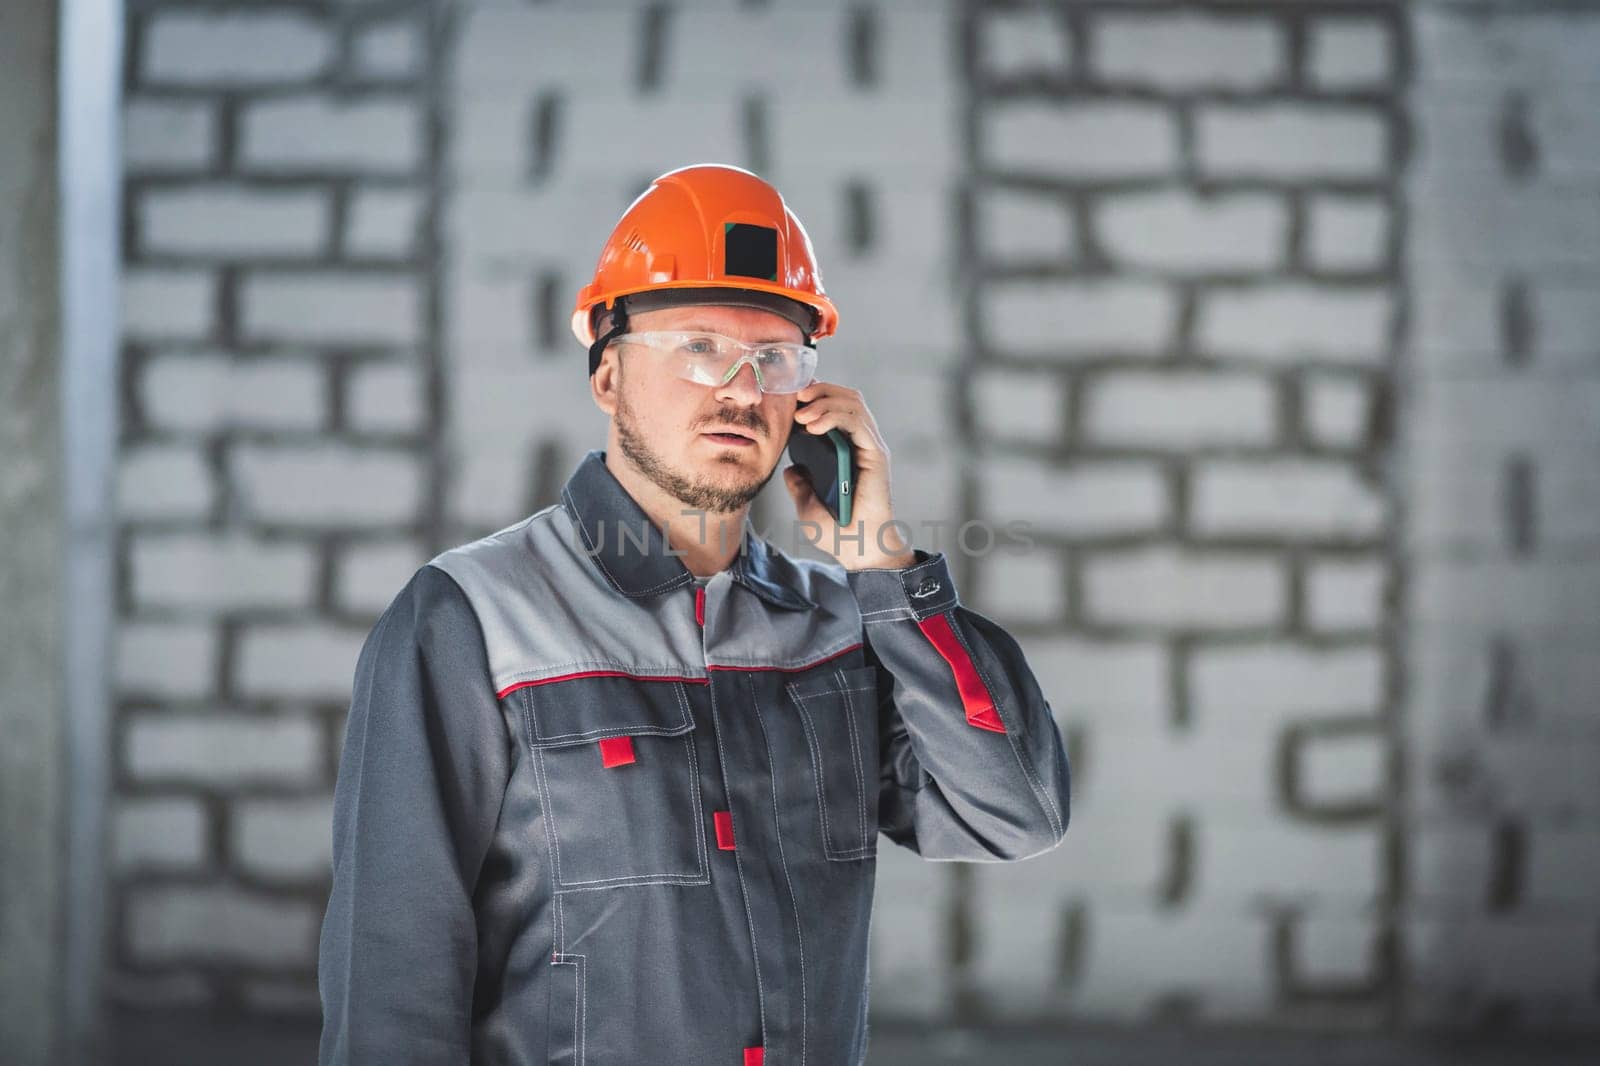 Caucasian male builder in overalls and helmet speaks on a cell phone.